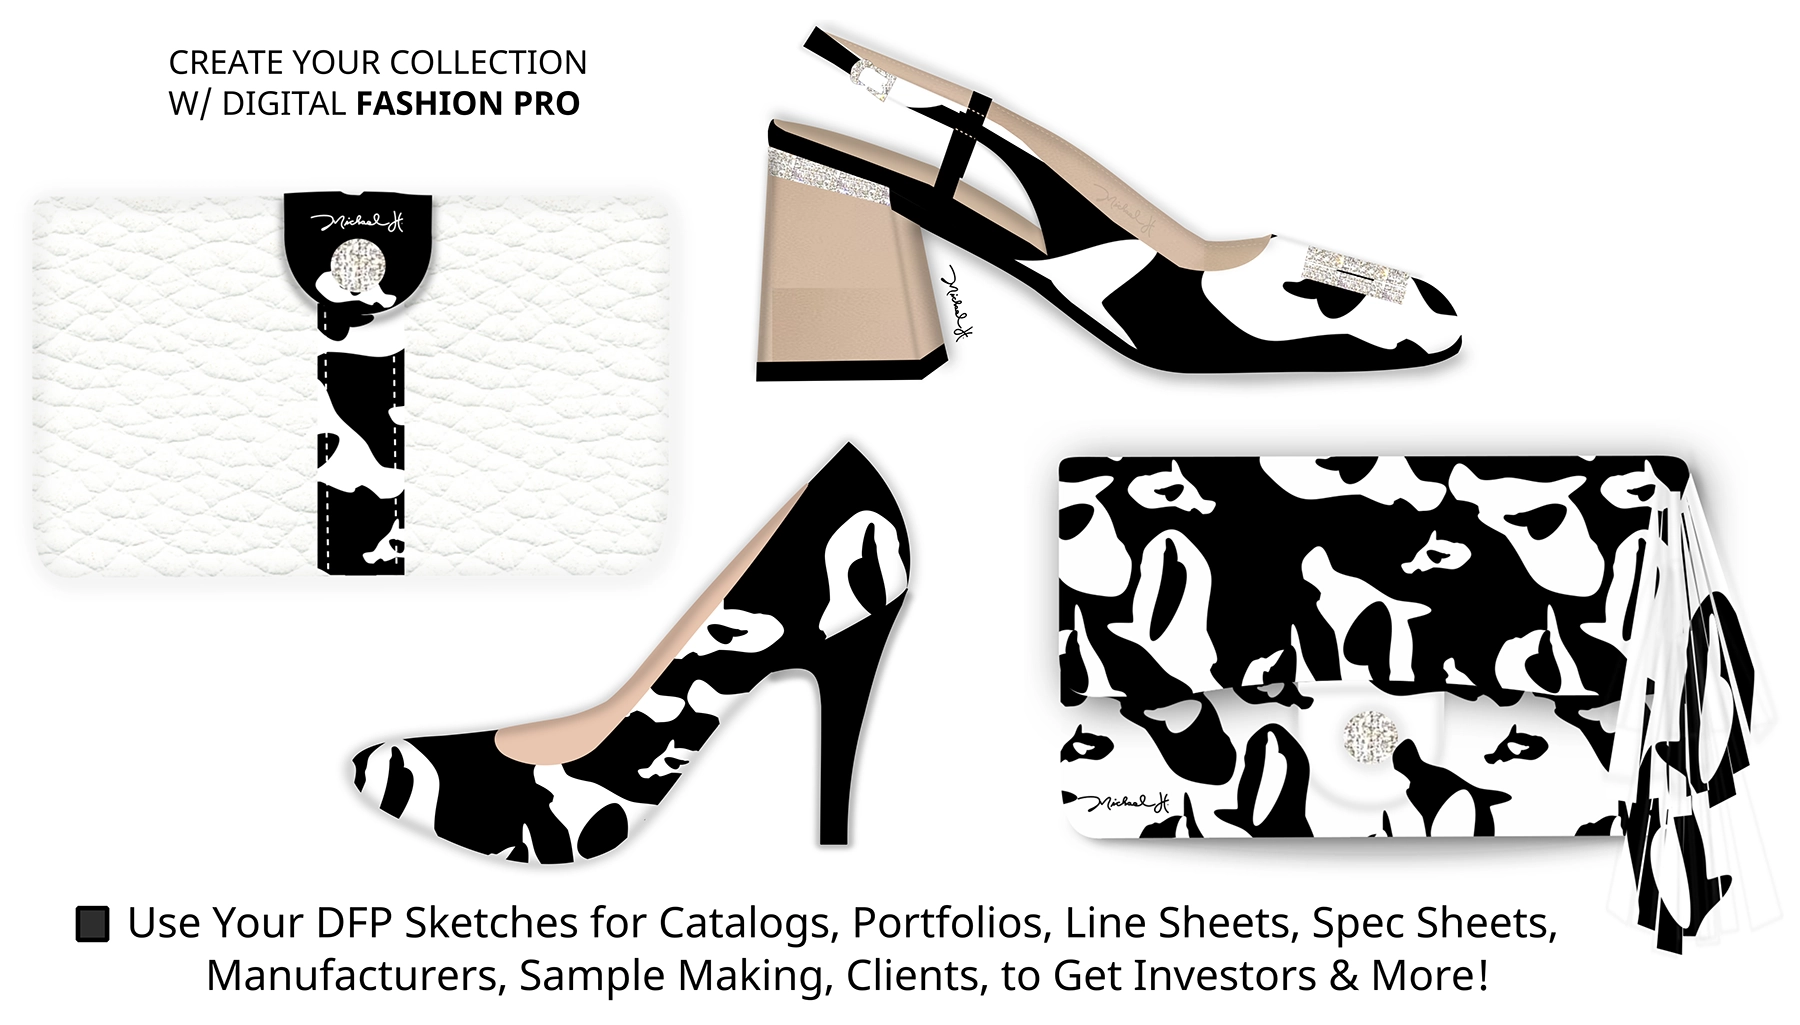 DESIGN SHOES, ACCESSORIES AND HANDBAGS WITH DIGITAL FASHION PRO